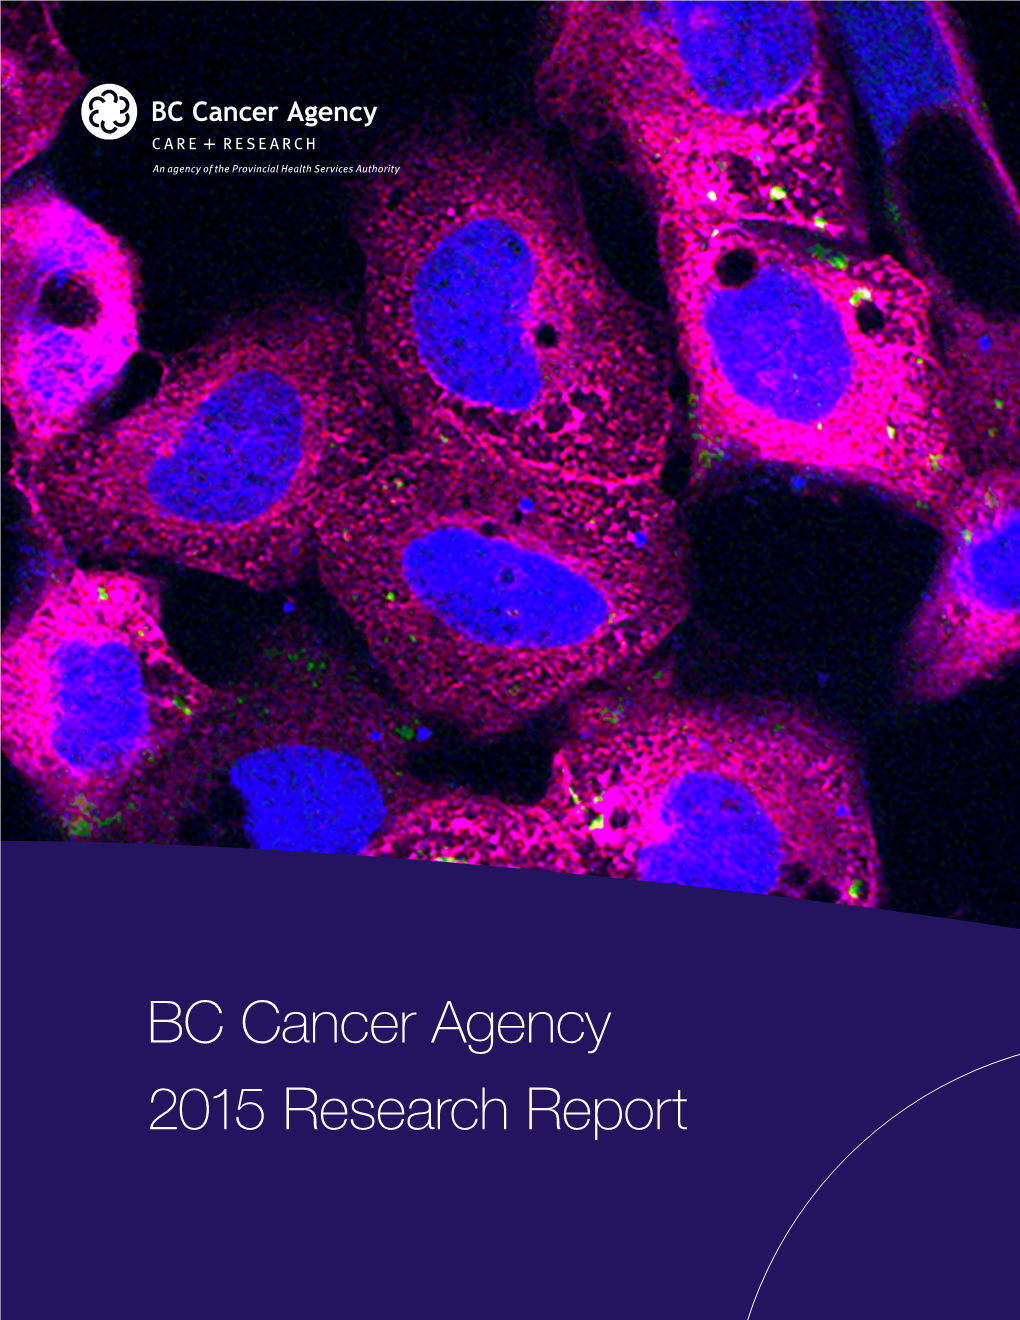 BC Cancer Agency 2015 Research Report